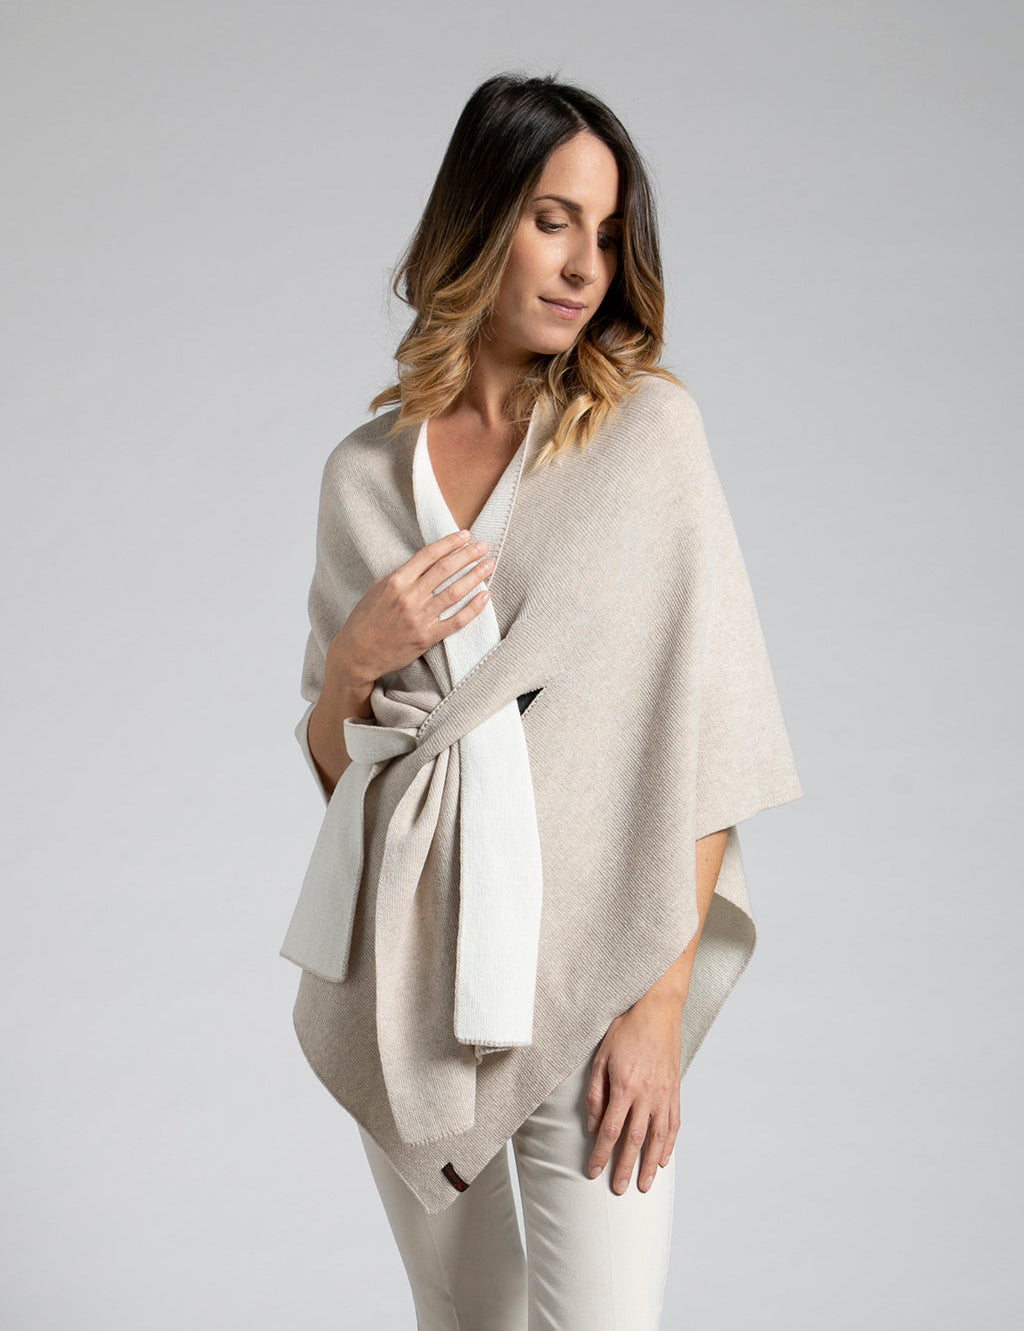 Mantella Firenze Luxe Wool Cape by Curling Collection